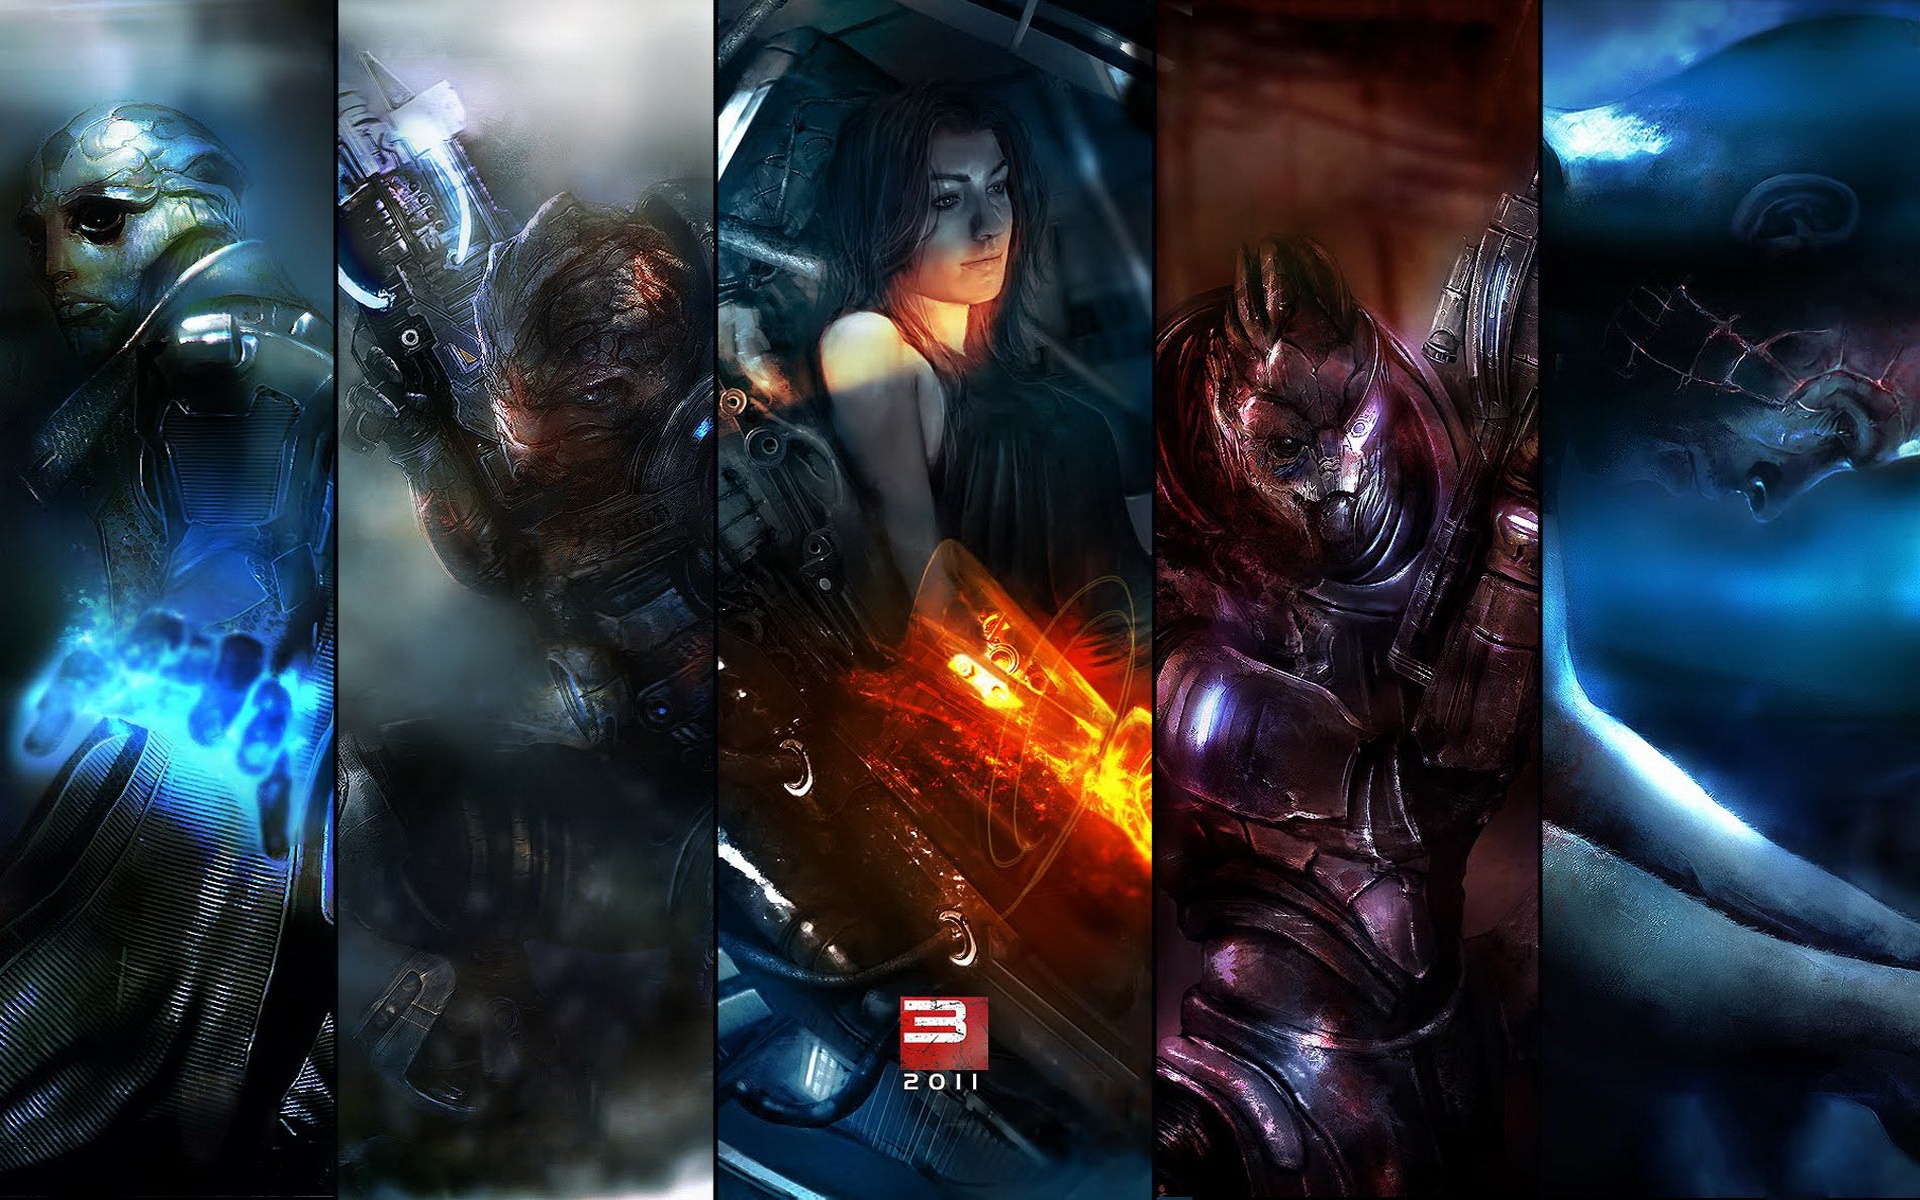 Mass Effect characters Shepard, Thane, Grunt, Garrus, and Miranda in a dramatic video game wallpaper.